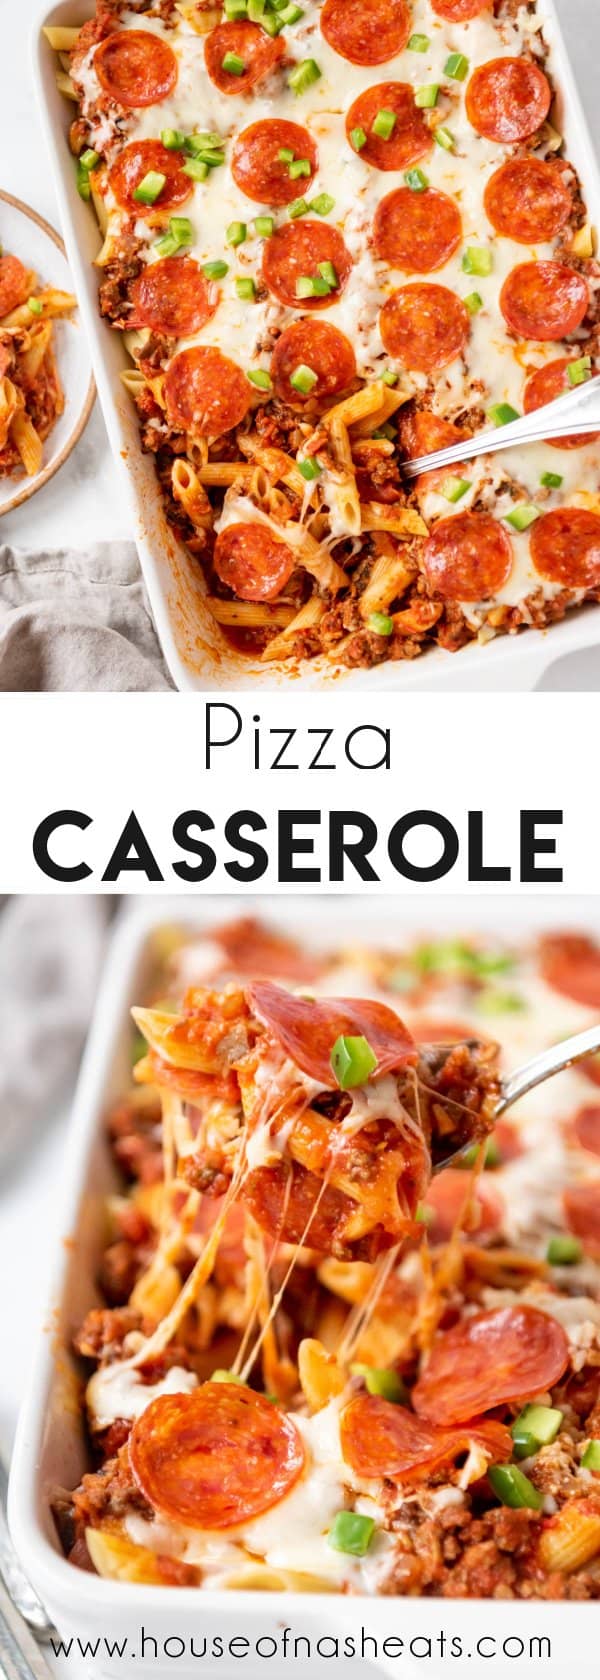 A collage of pizza casserole images with text overlay.